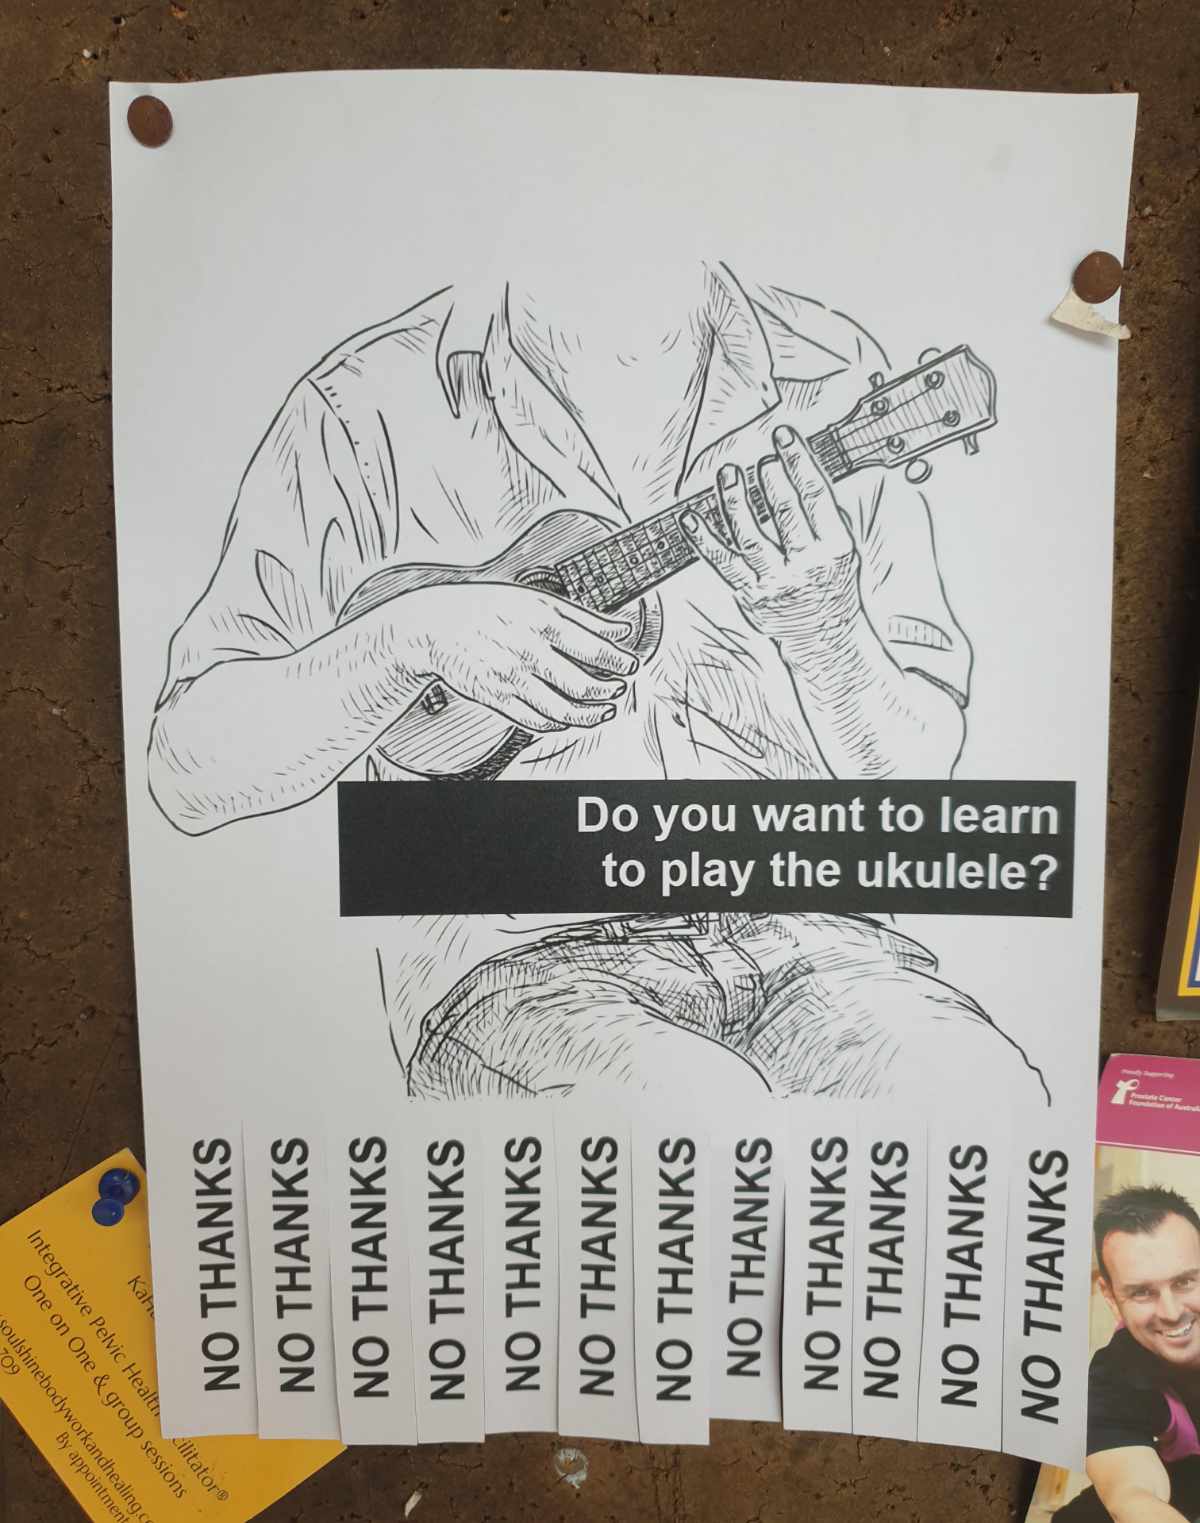 Do you want to learn to play the Ukulele?